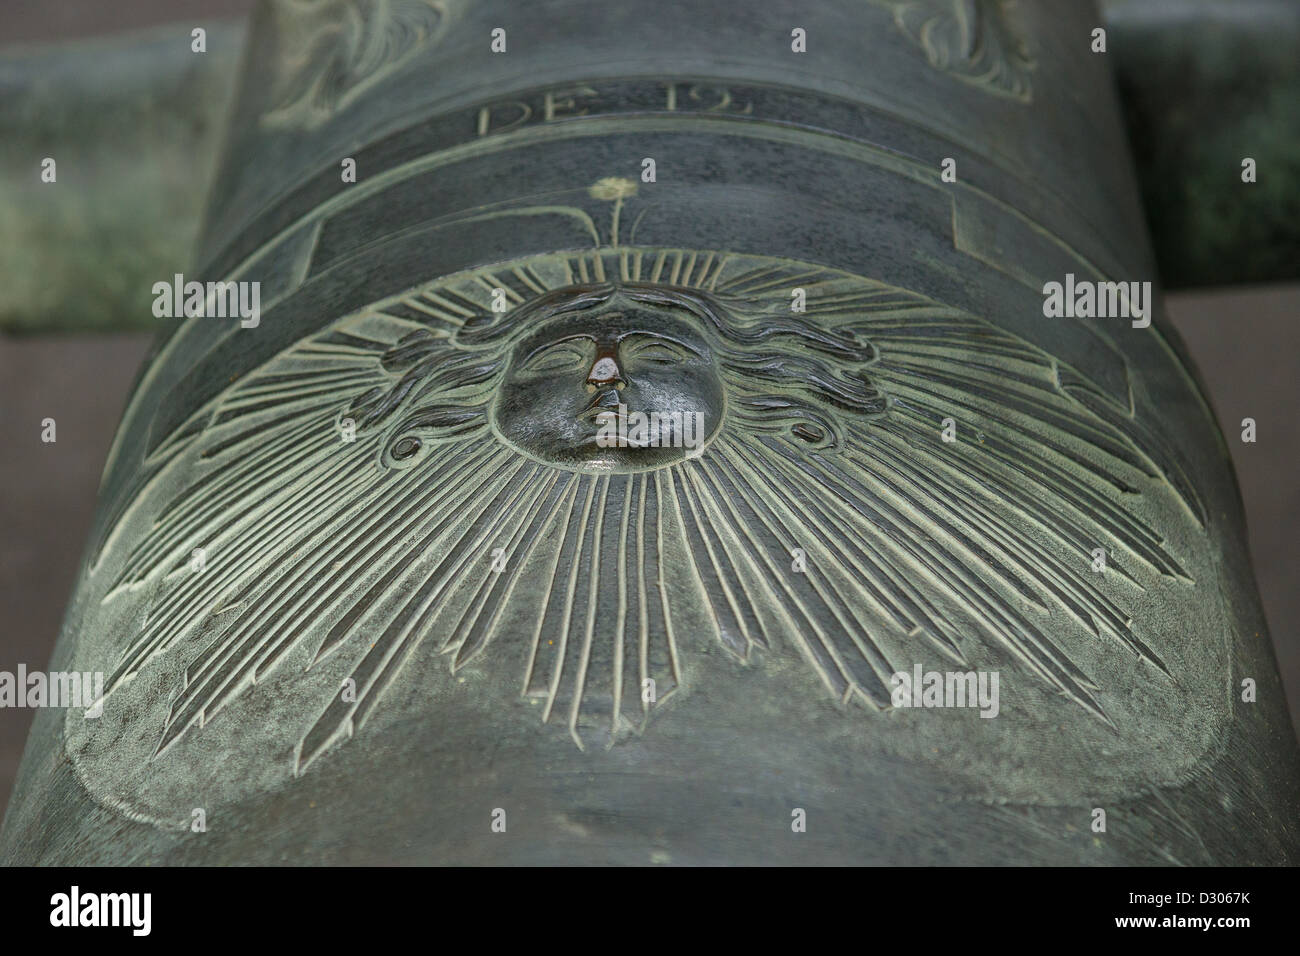 A fragment of the coat of arms of King of France Louis XIV (Sun King) on the old bronze cannon. Stock Photo